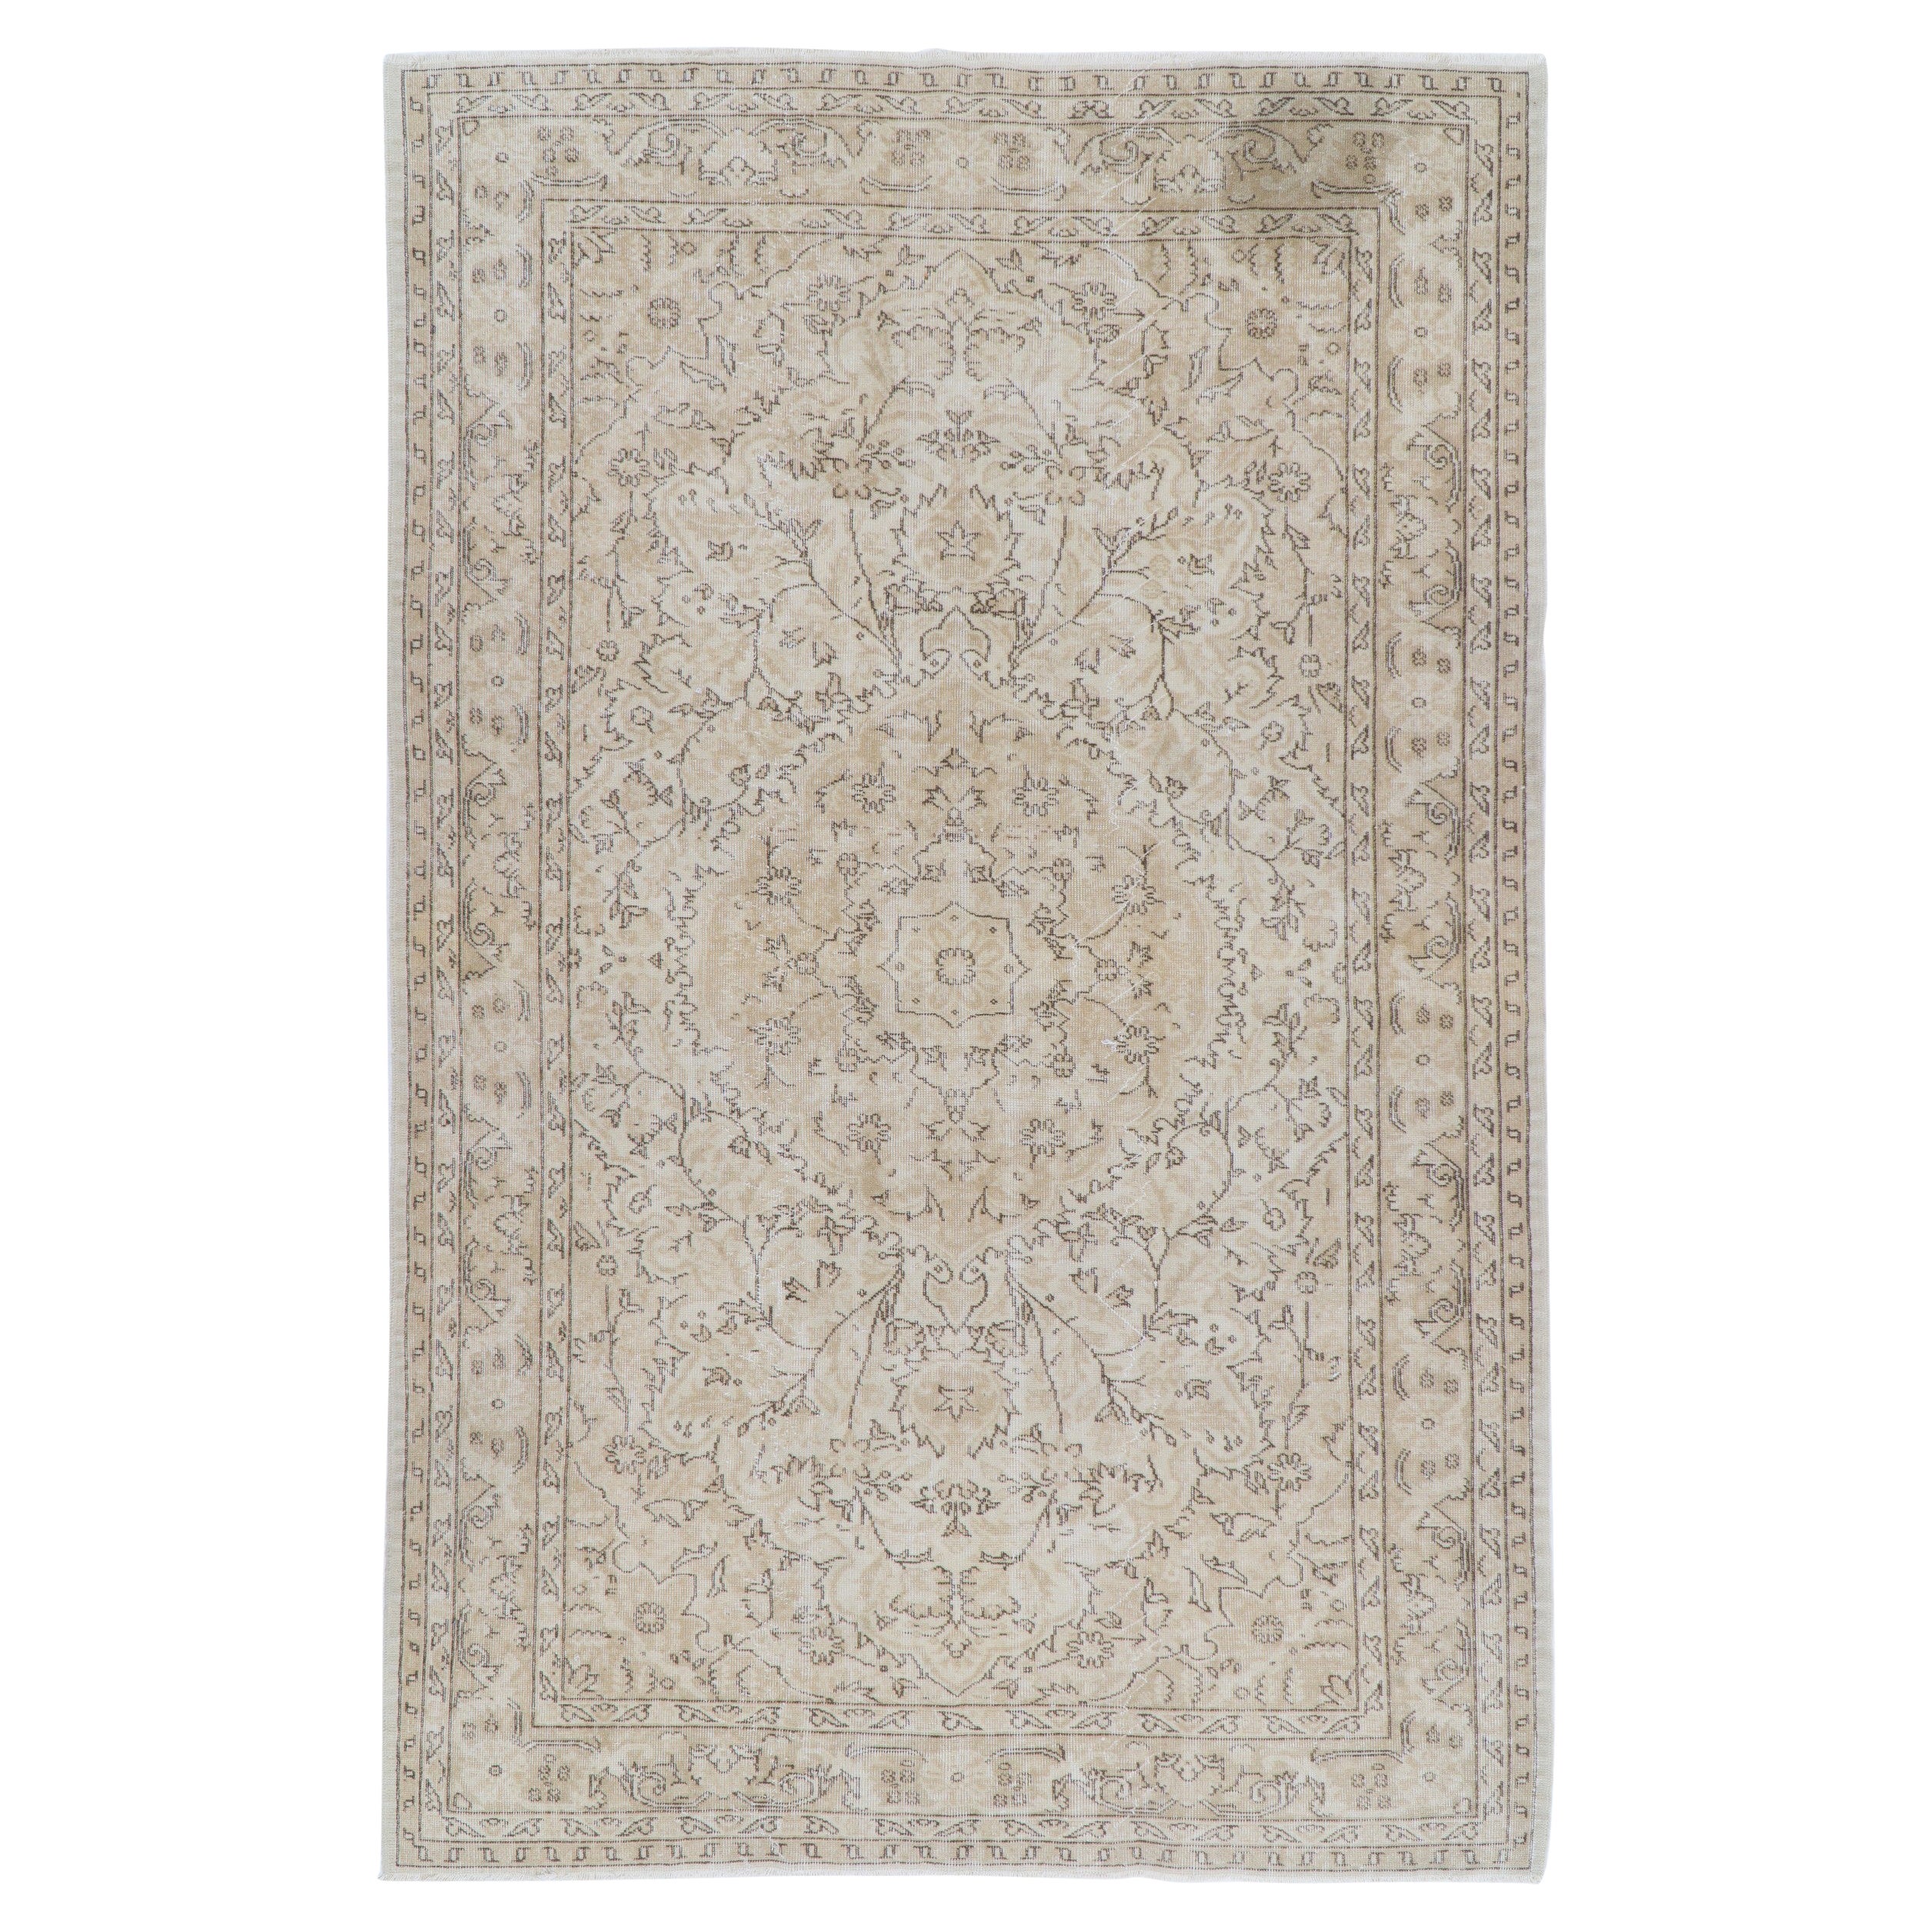 6.3x10 Ft Vintage Distressed Handmade Wool Anatolian Rug in Soft Neutral Colors